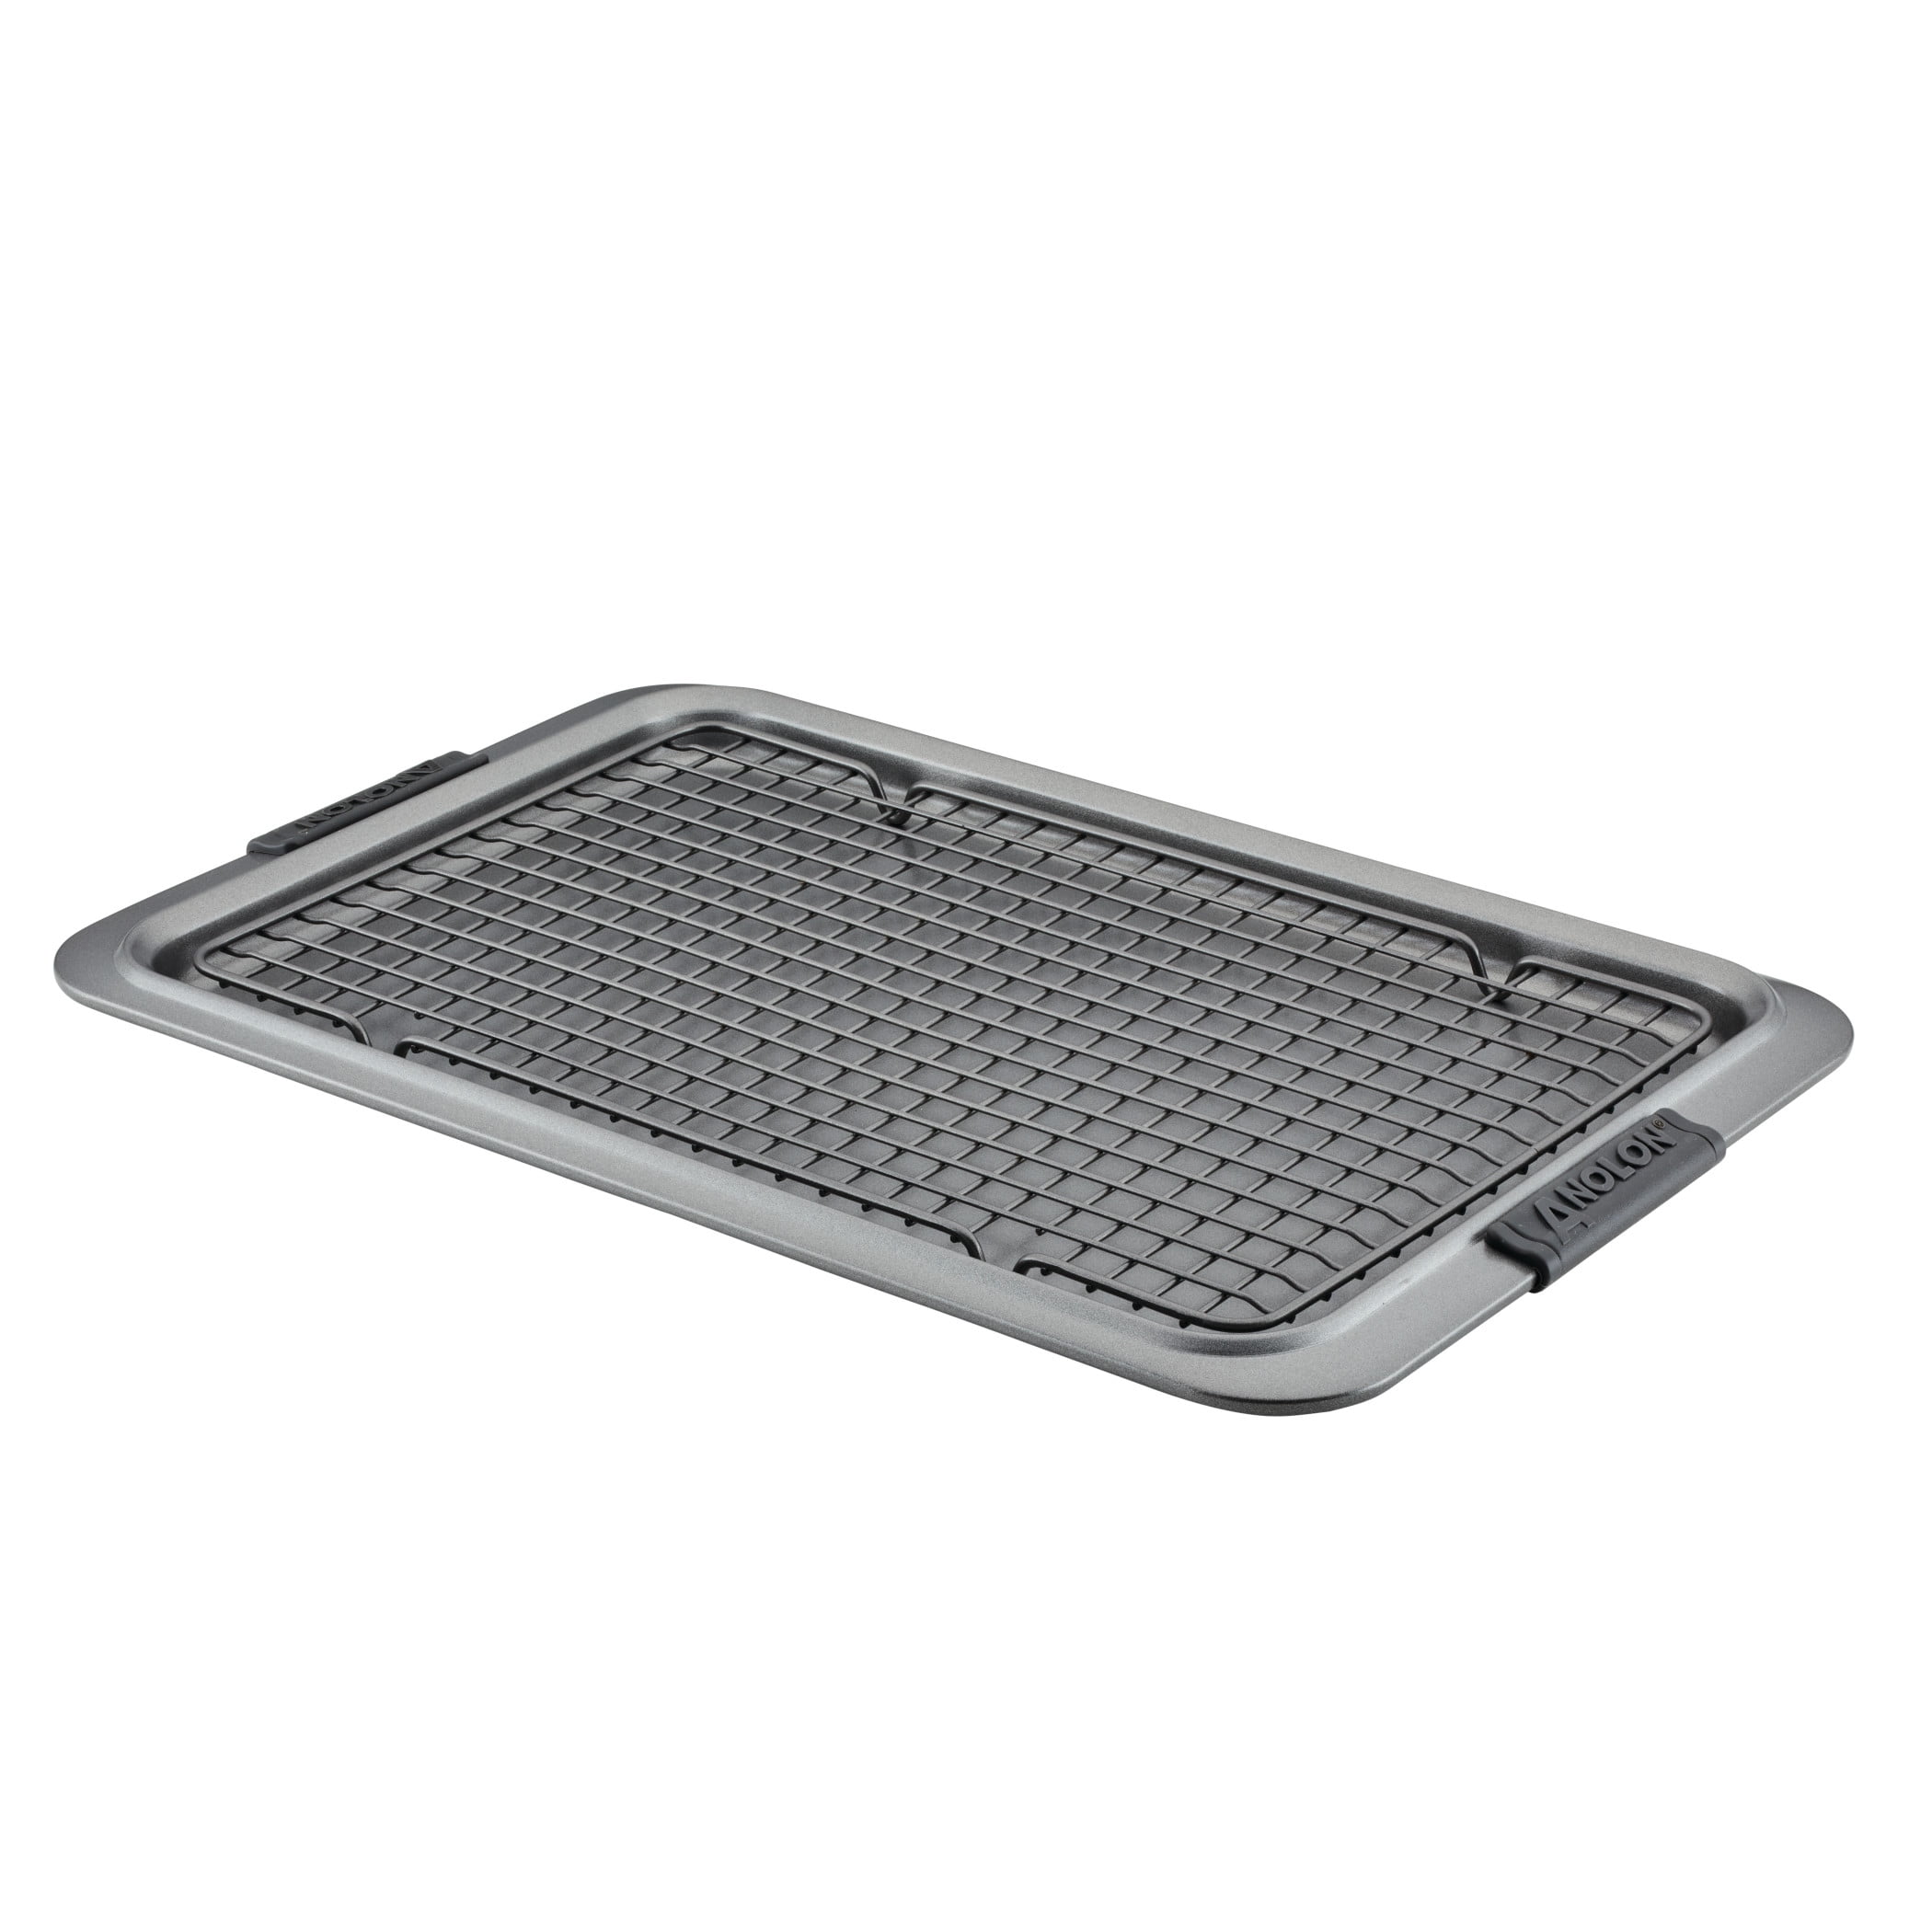 11 x 17 Baking Sheet and Cooling Rack Set – Anolon